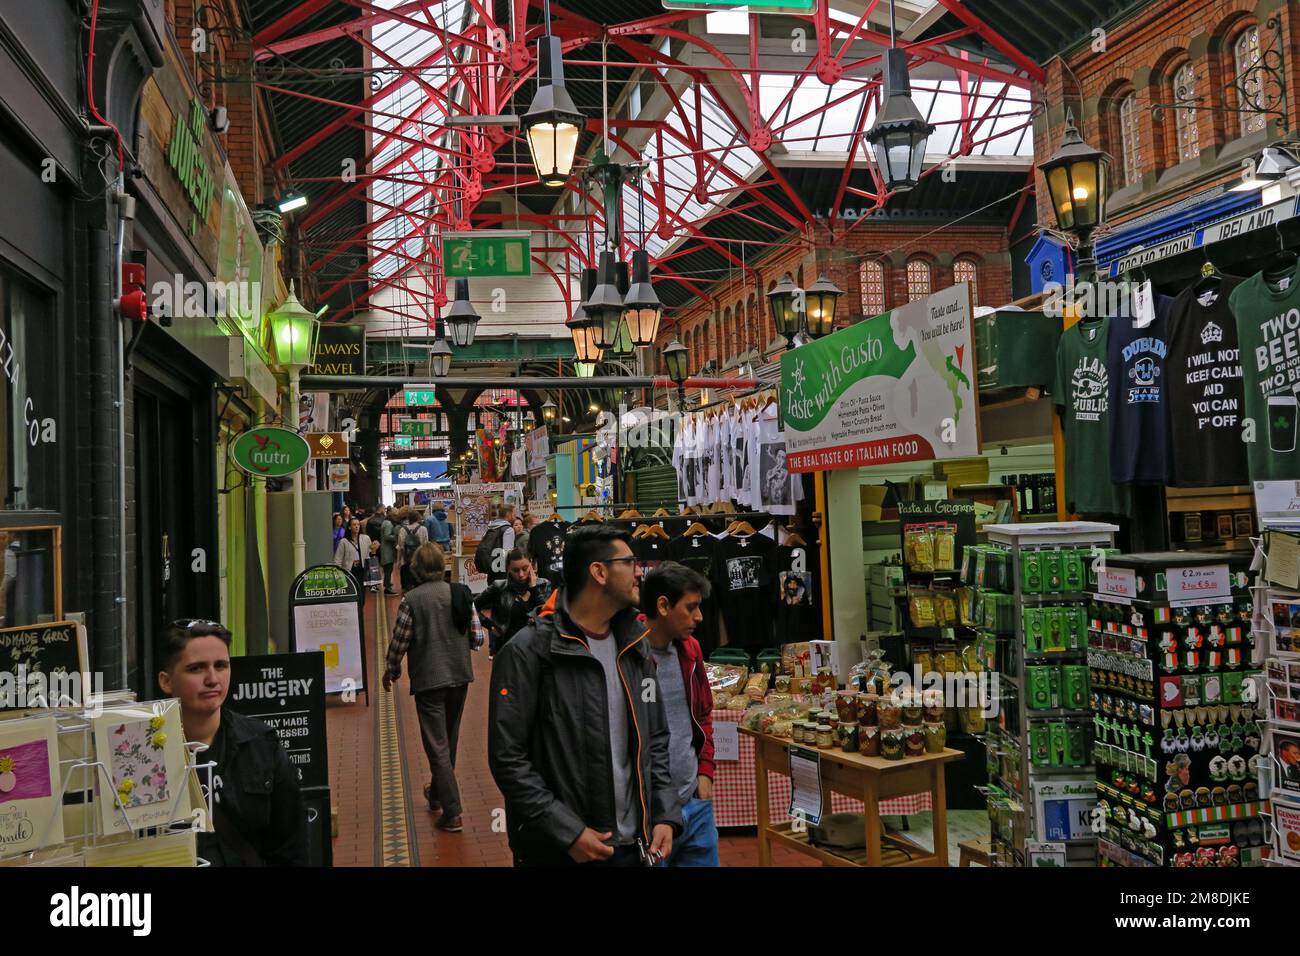 Shoppers at George's Street Arcade, South Great George's Street, Dublin, Eire Stock Photo